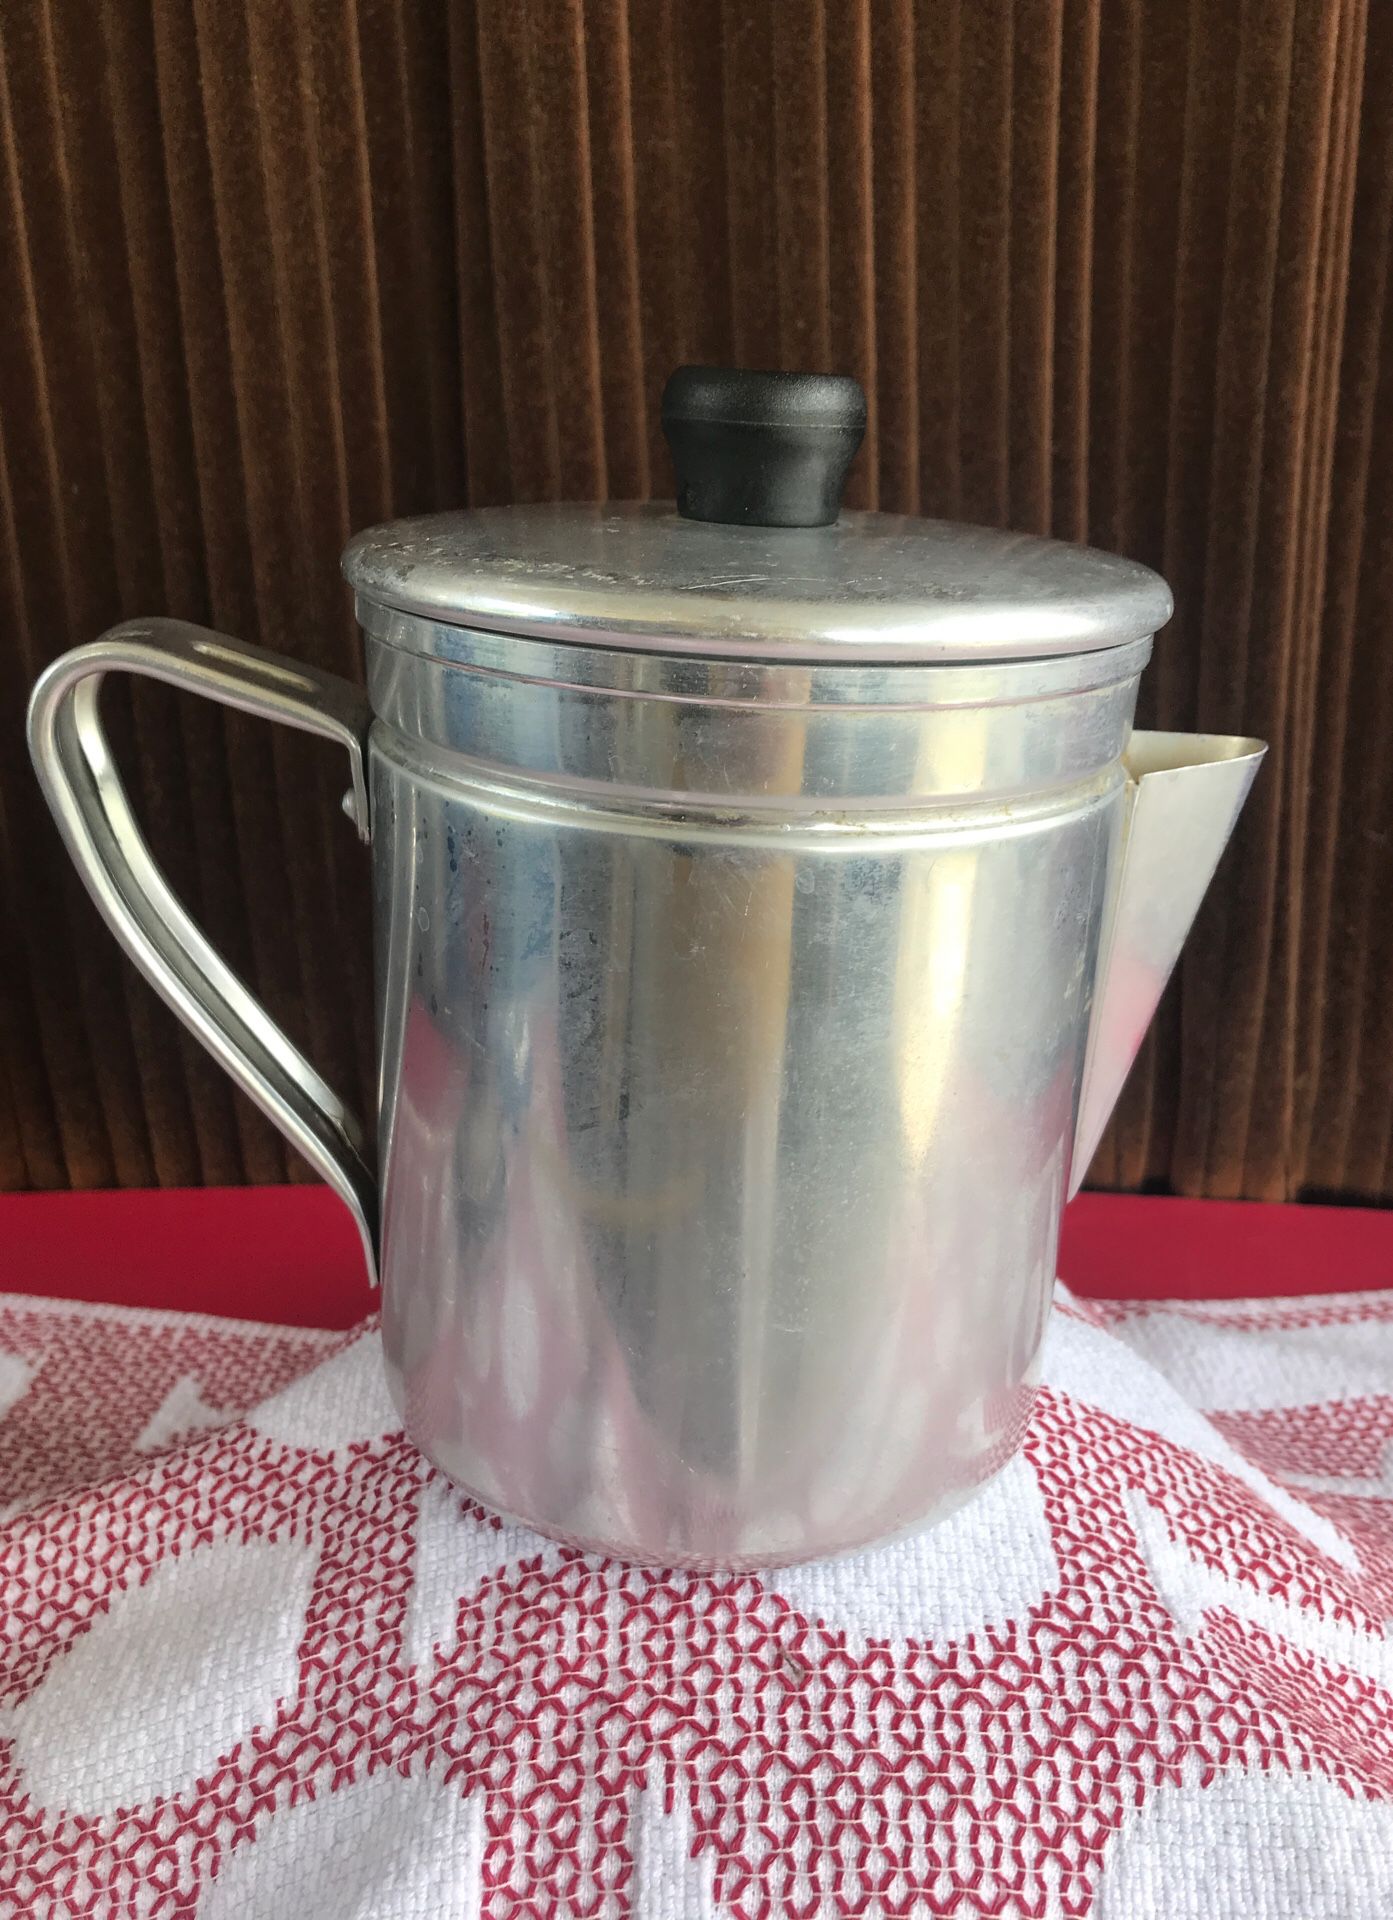 Metal teapot with lid